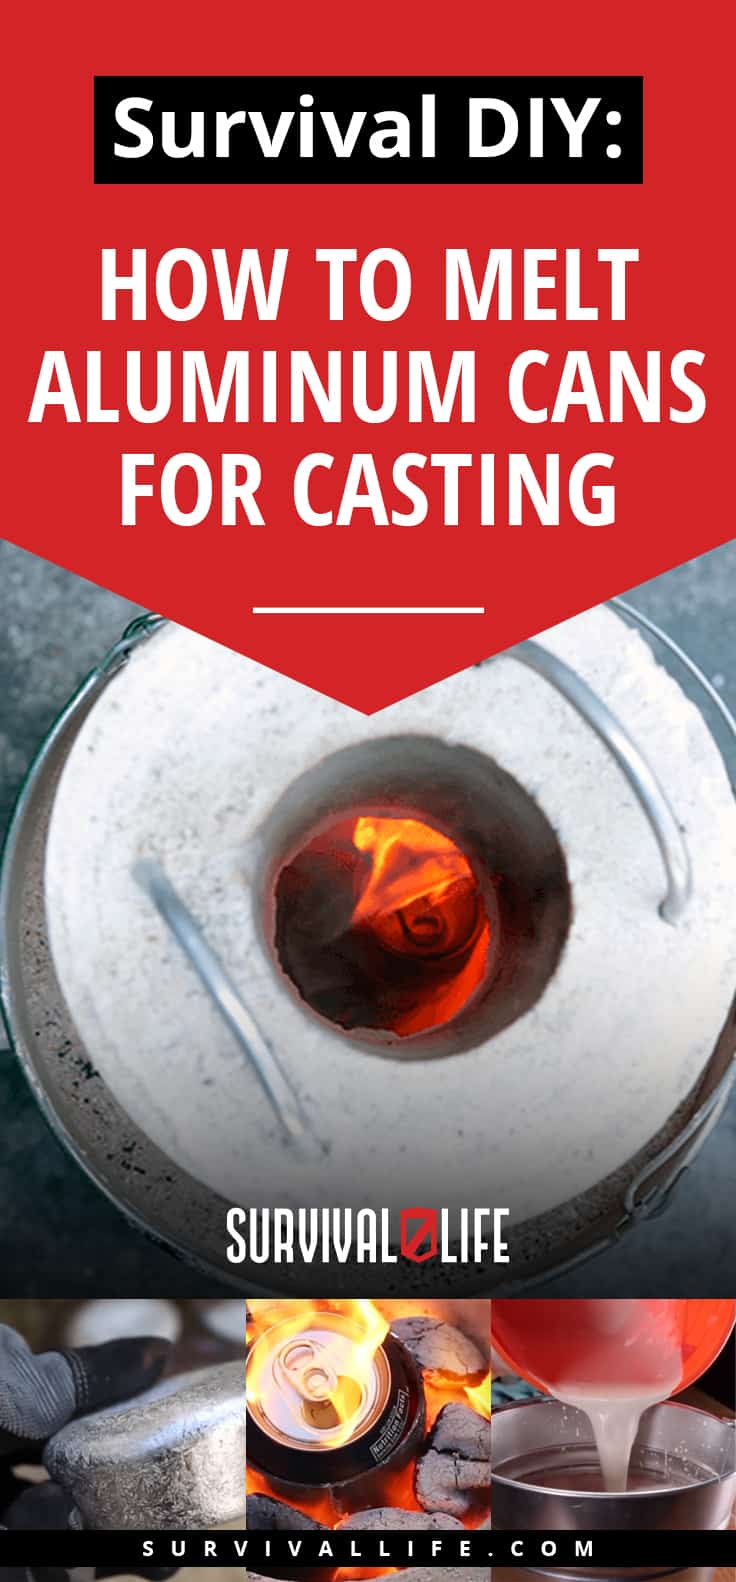 Survival DIY: How To Melt Aluminum Cans For Casting 